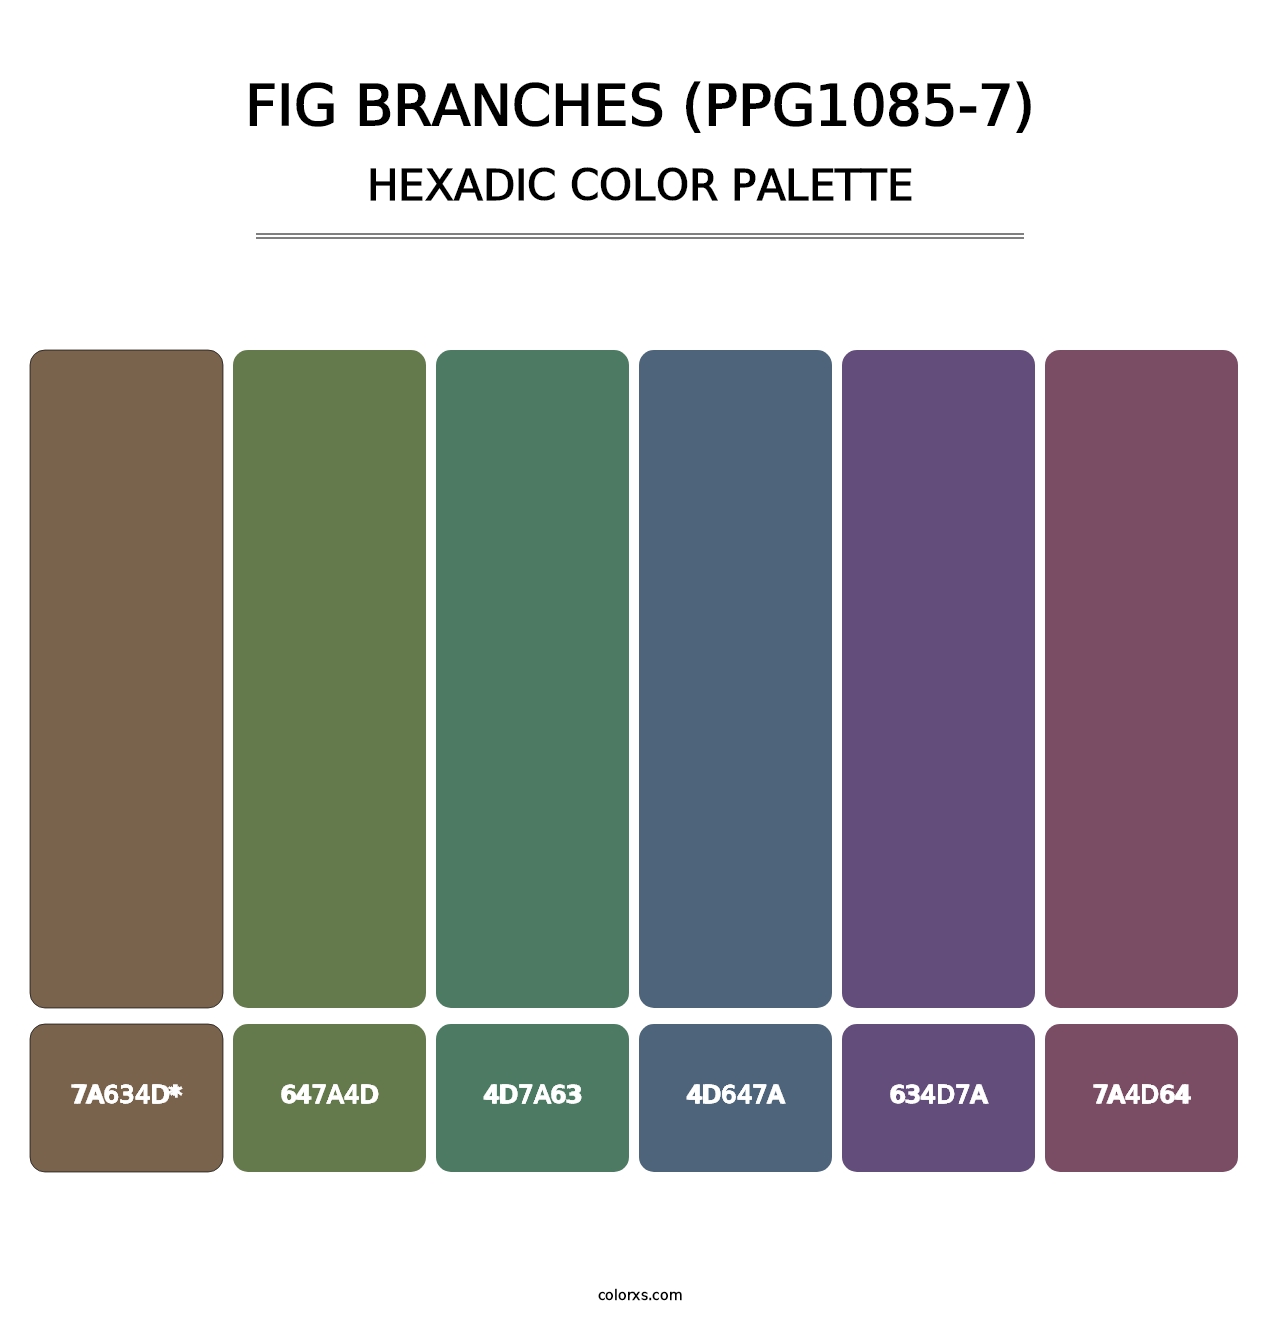 Fig Branches (PPG1085-7) - Hexadic Color Palette